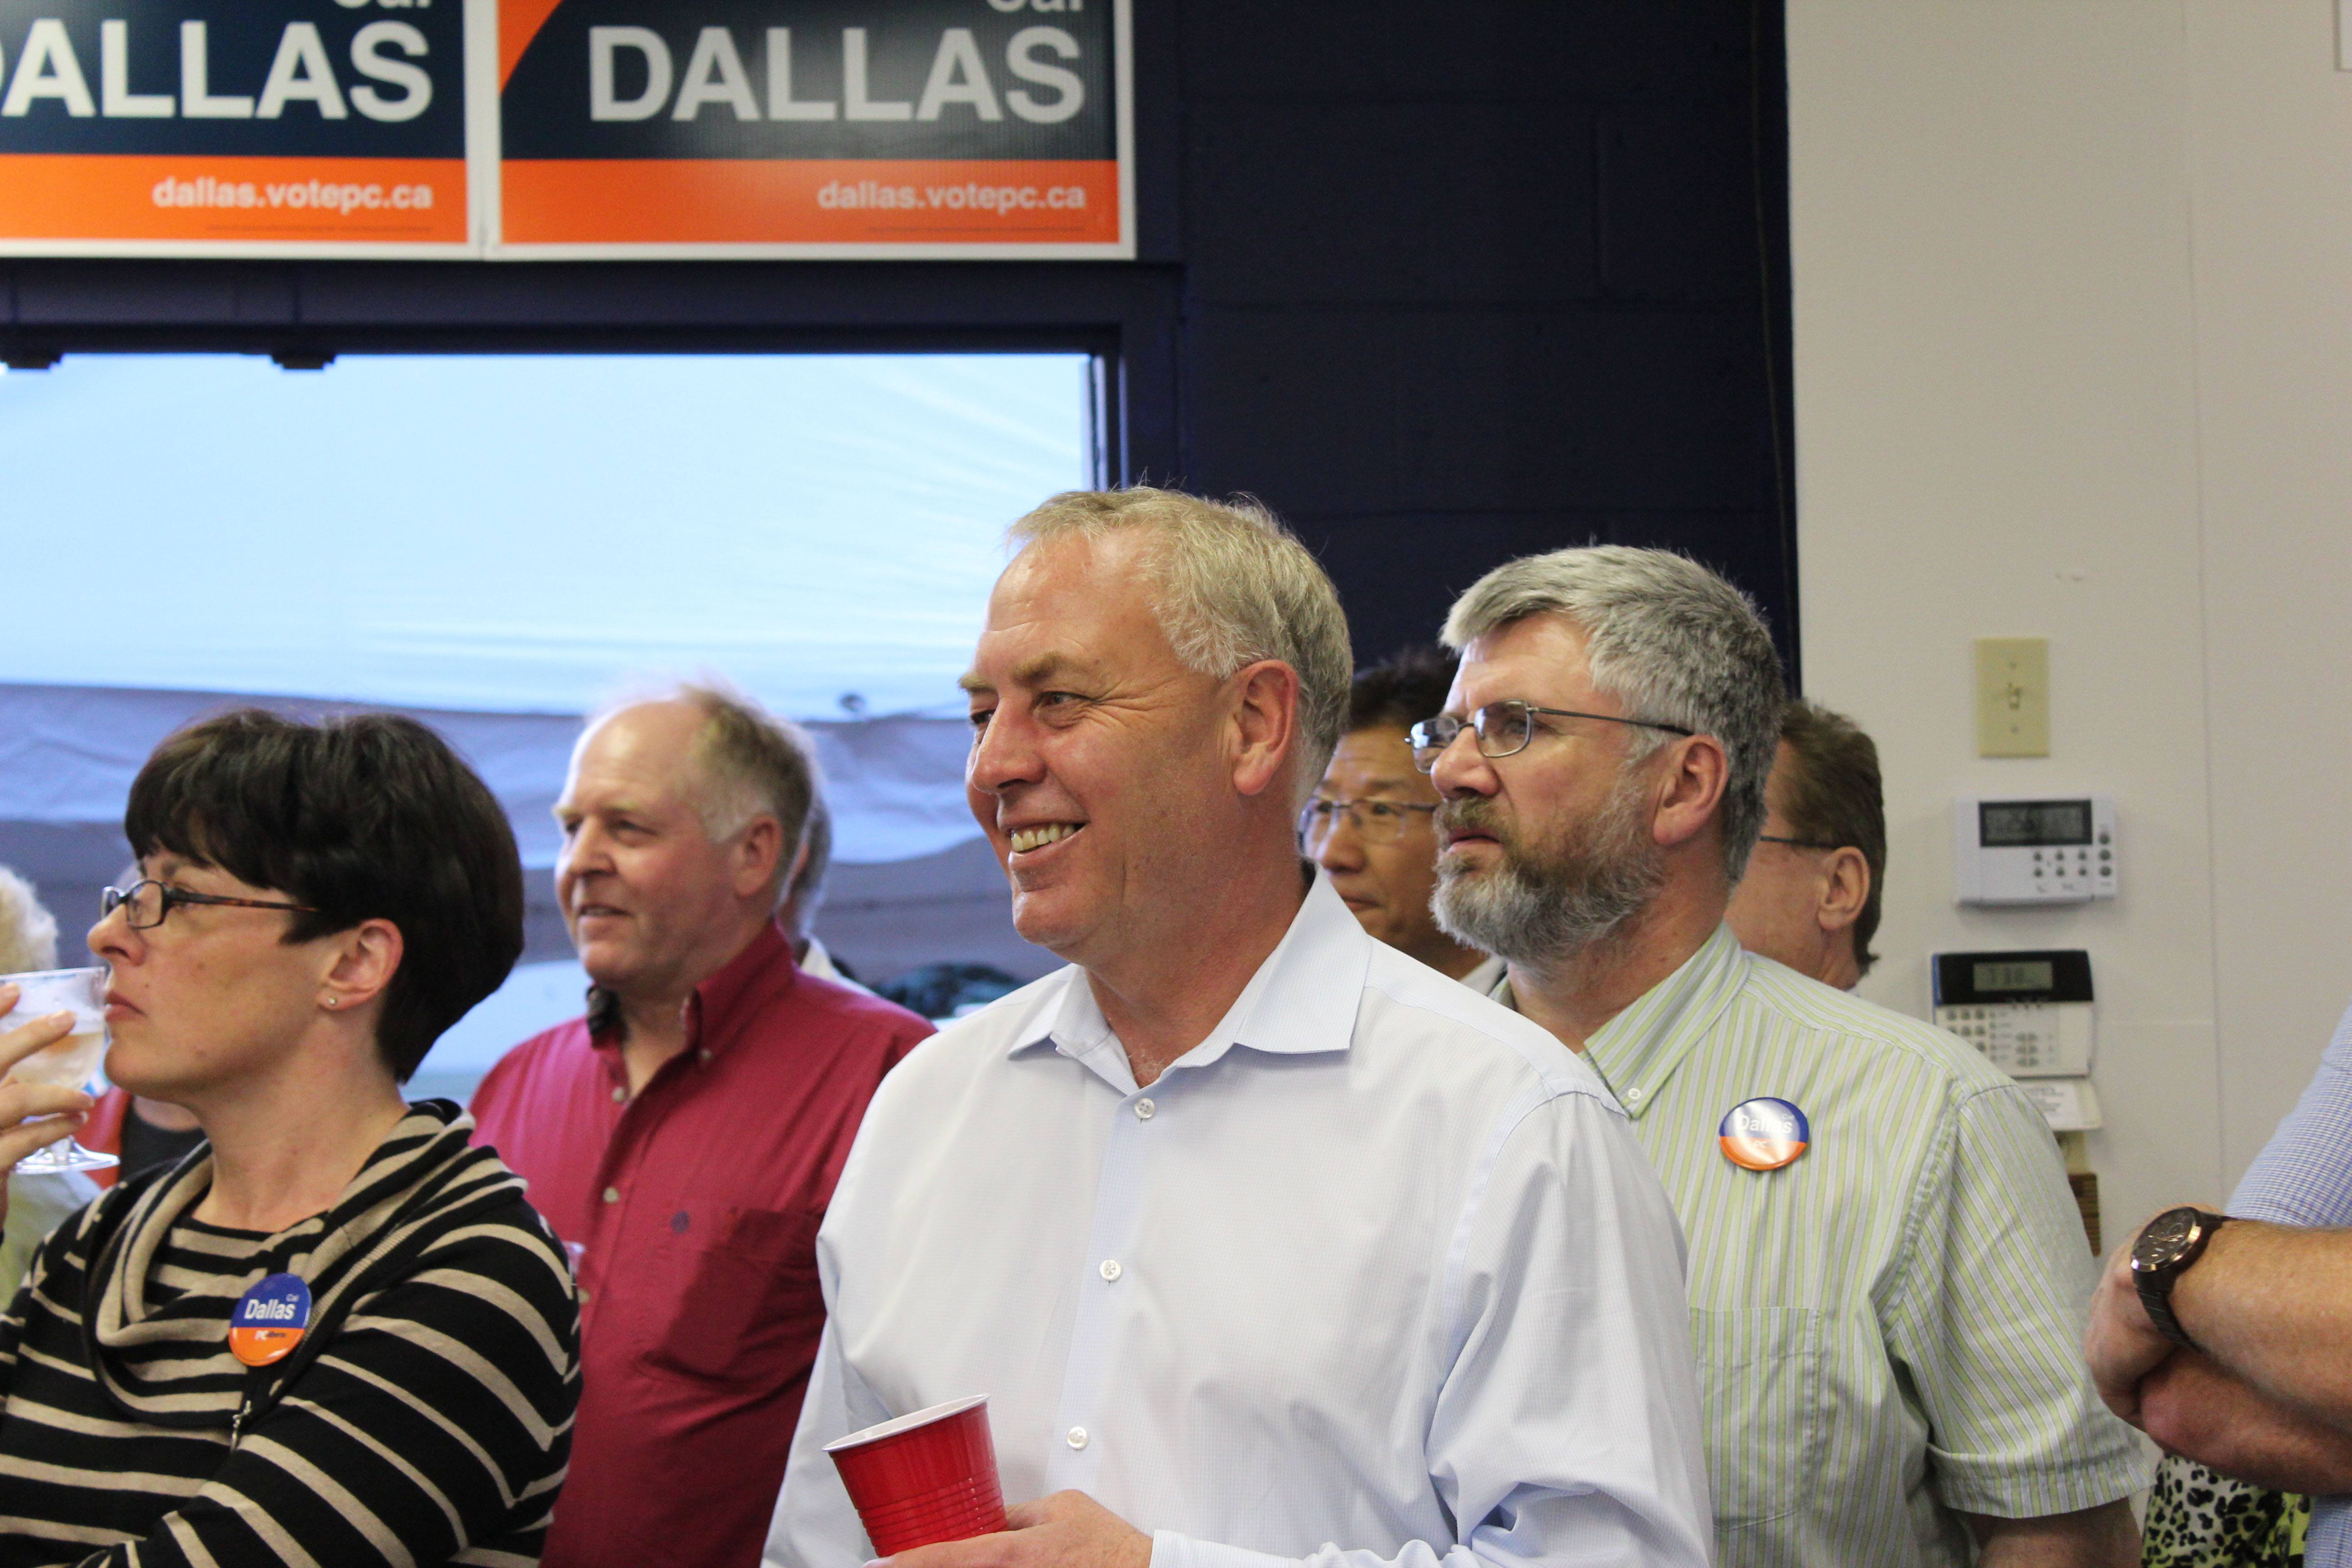 VICTORY- Cal Dallas celebrates his win at his campaign headquarters on election day.